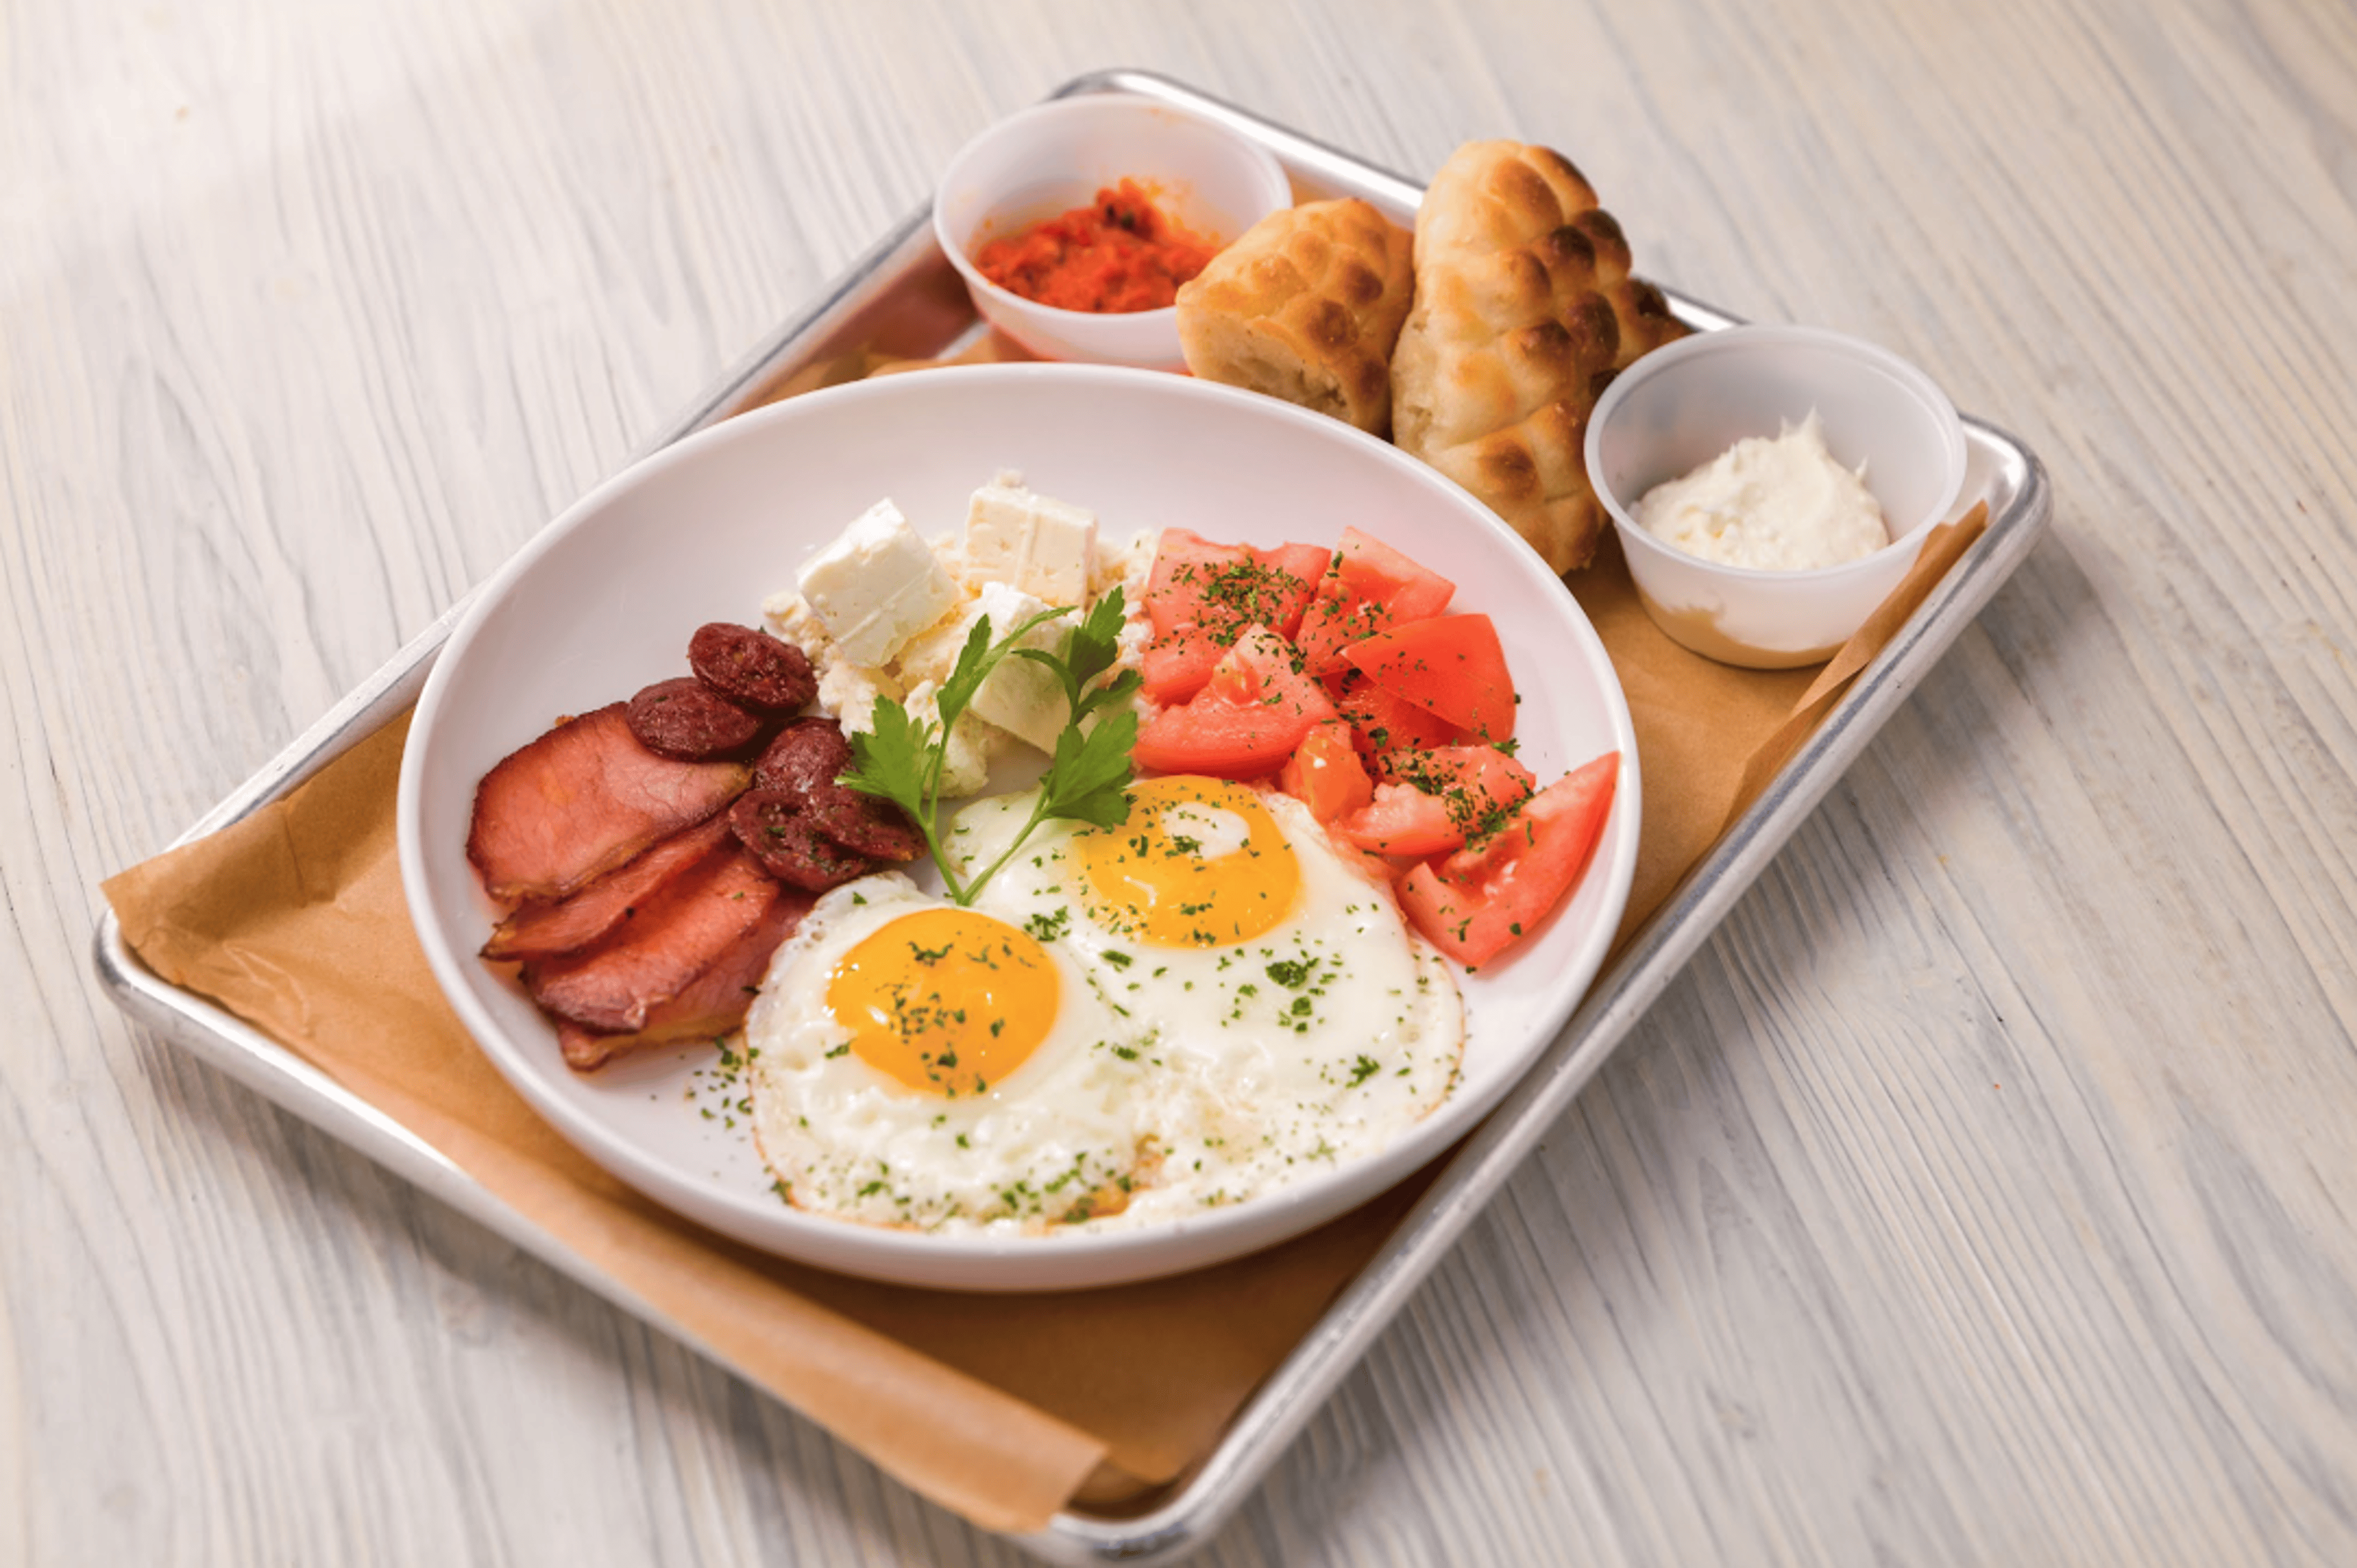 Delicious Breakfast Options to Start Your Day